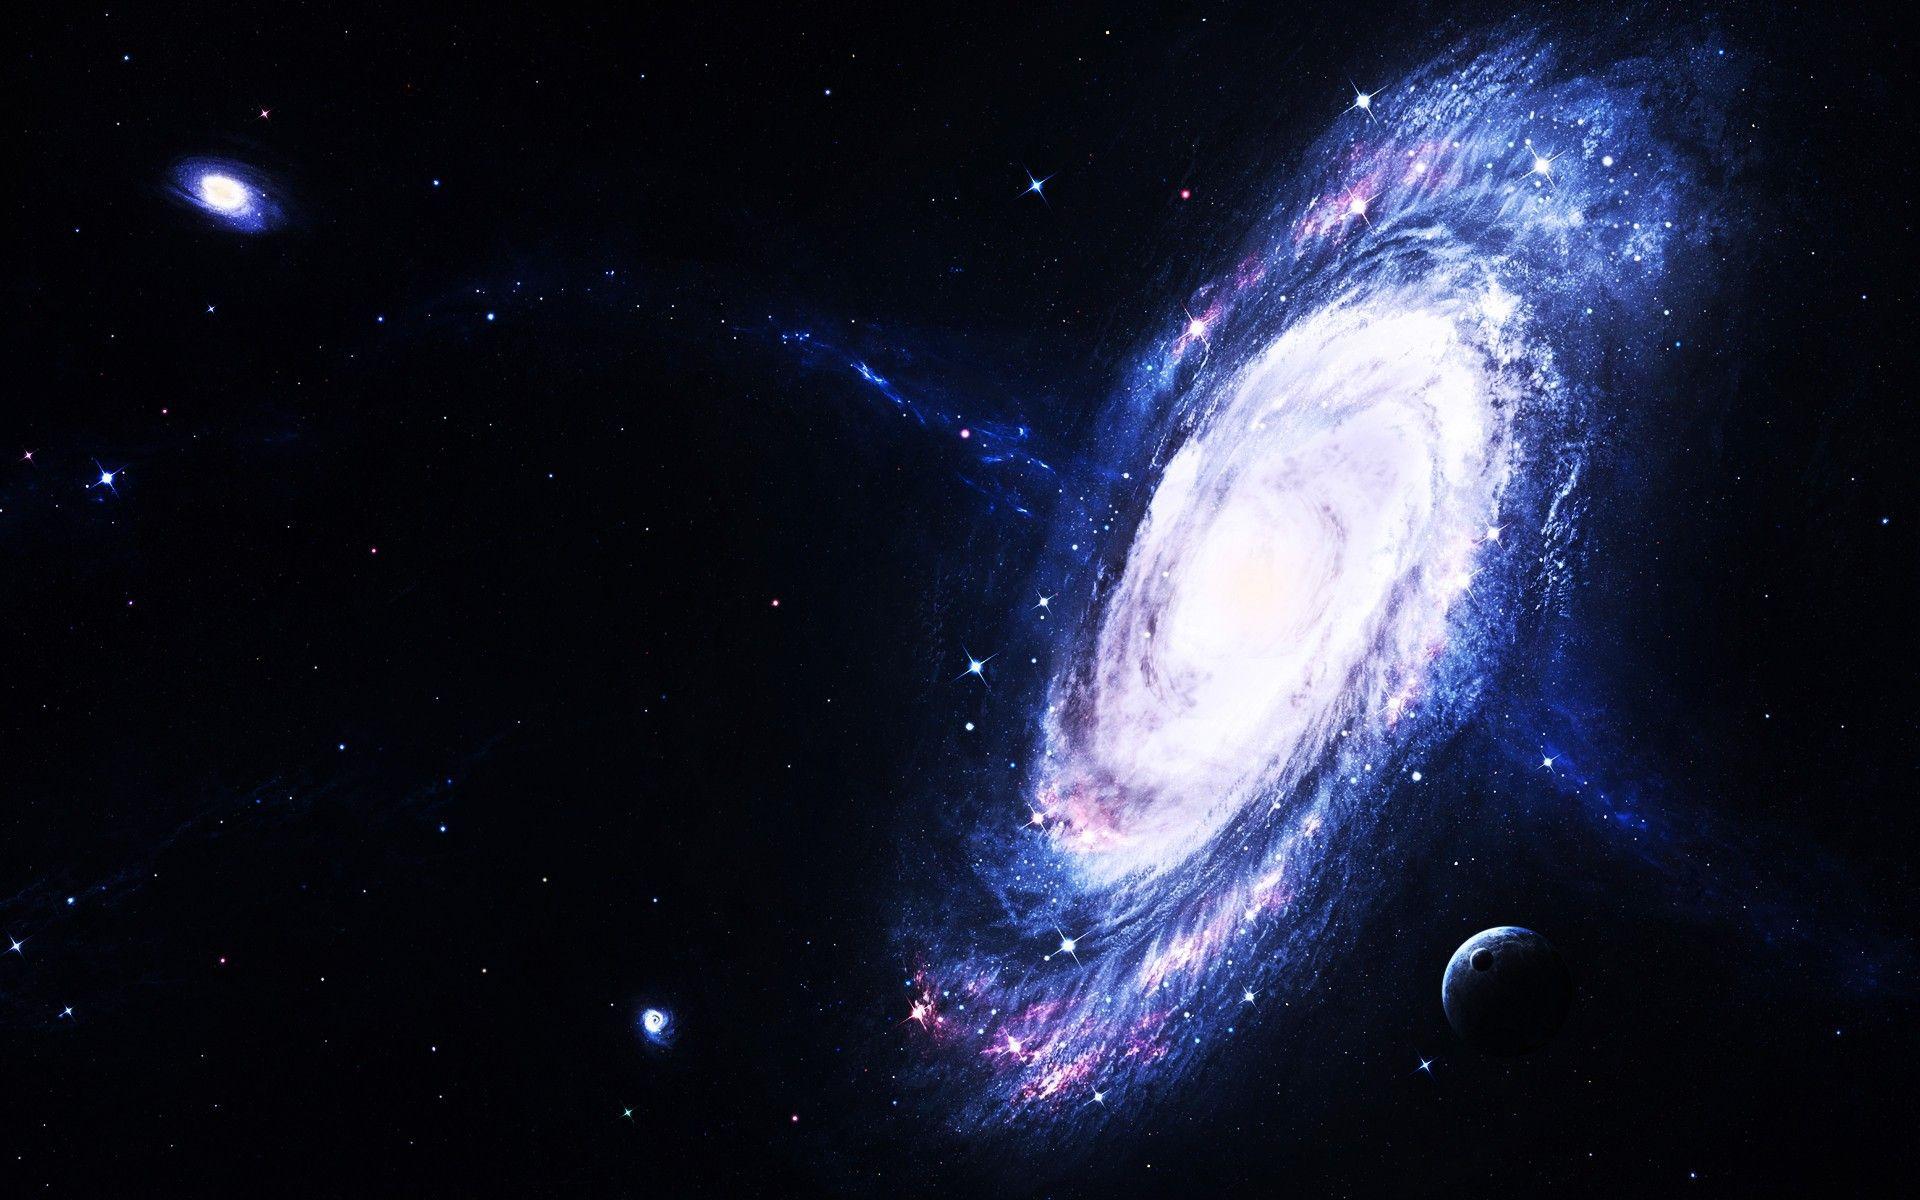 Spiral galaxy in space wallpaper and image